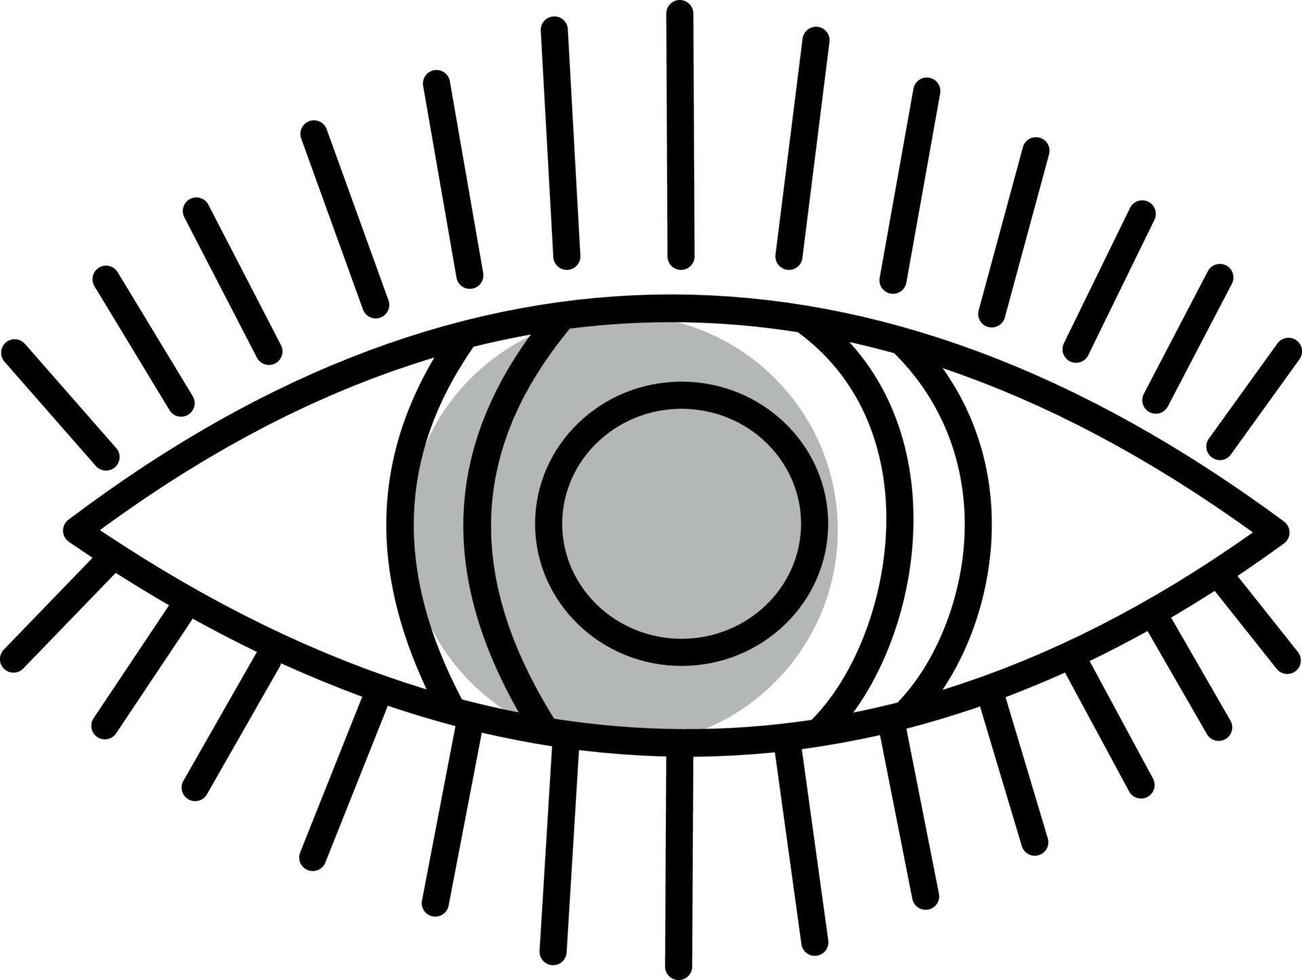 Abstarct eye, illustration, vector on a white background.